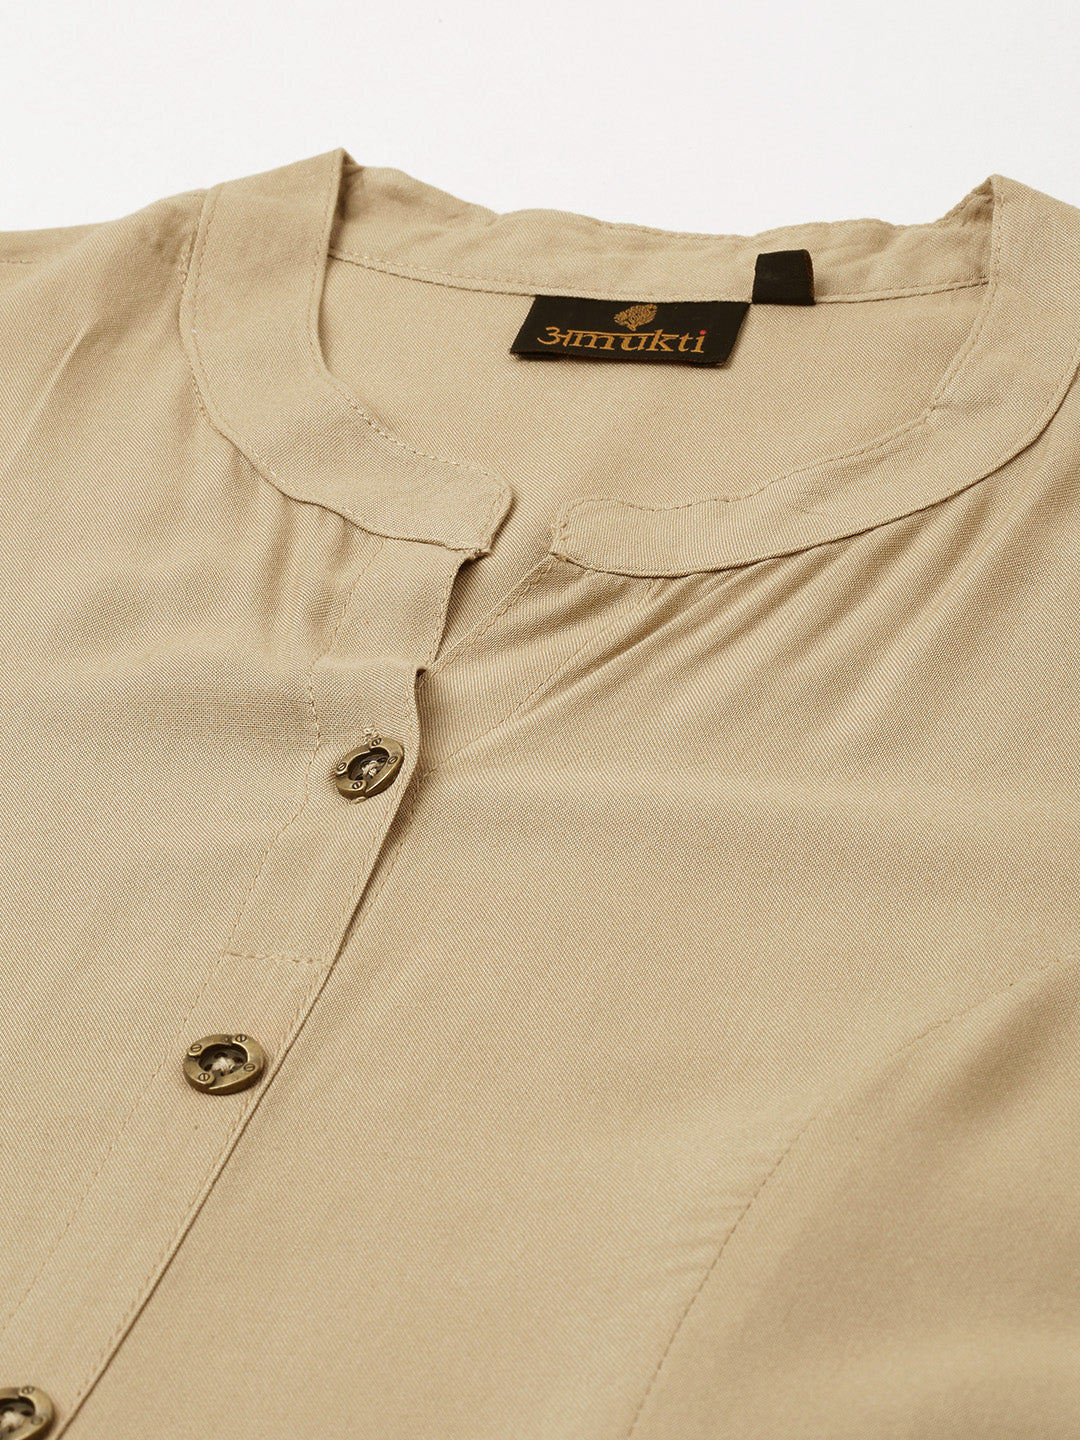 A knee-length, A-line kurta in a soft almond hue perfect for casual wear